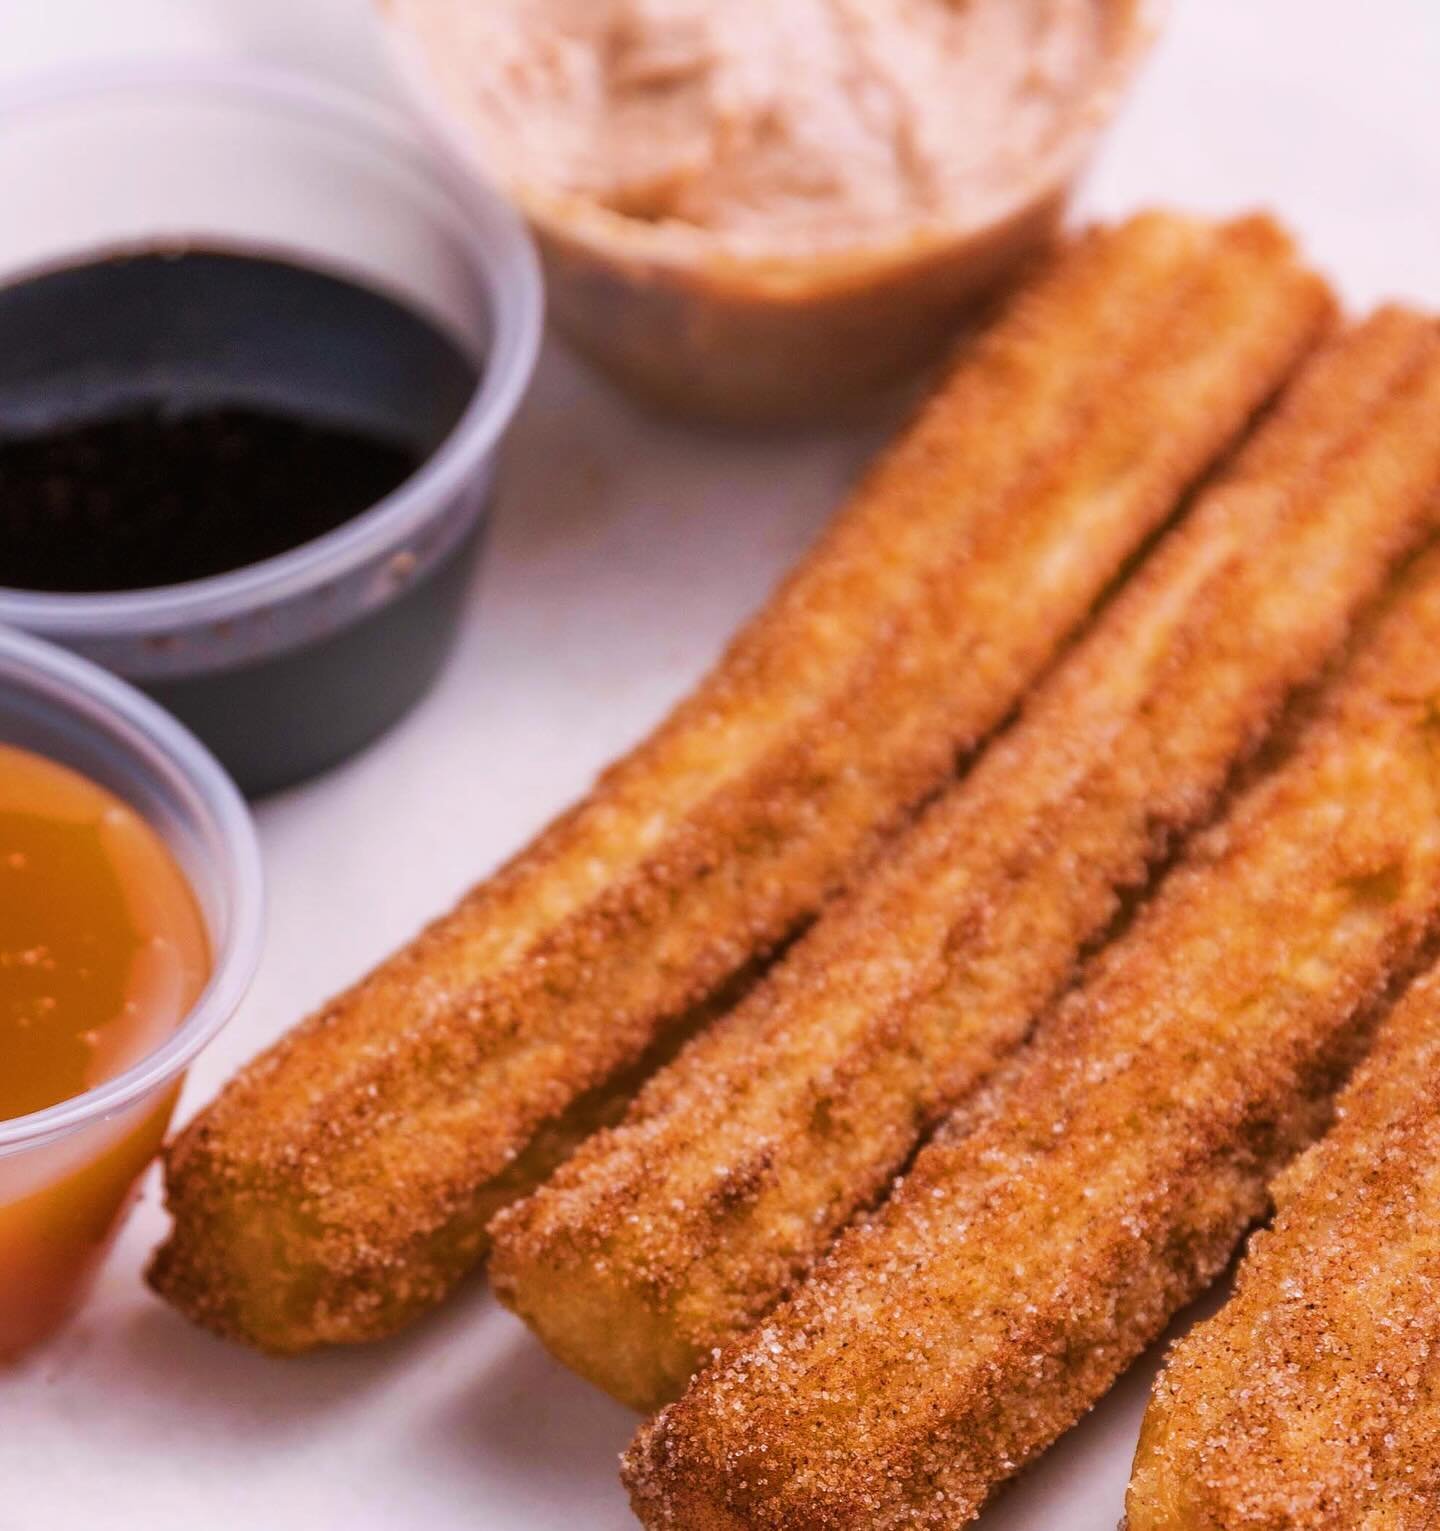 Hey, check out our awesome Mini Churros Platter, man! 😎 Five of our homemade mini churros, rolled in cinnamon sugar and ready to rock your taste buds. Served with groovy chocolate, lime cream, and caramel sauce for some far-out dipping action. Order